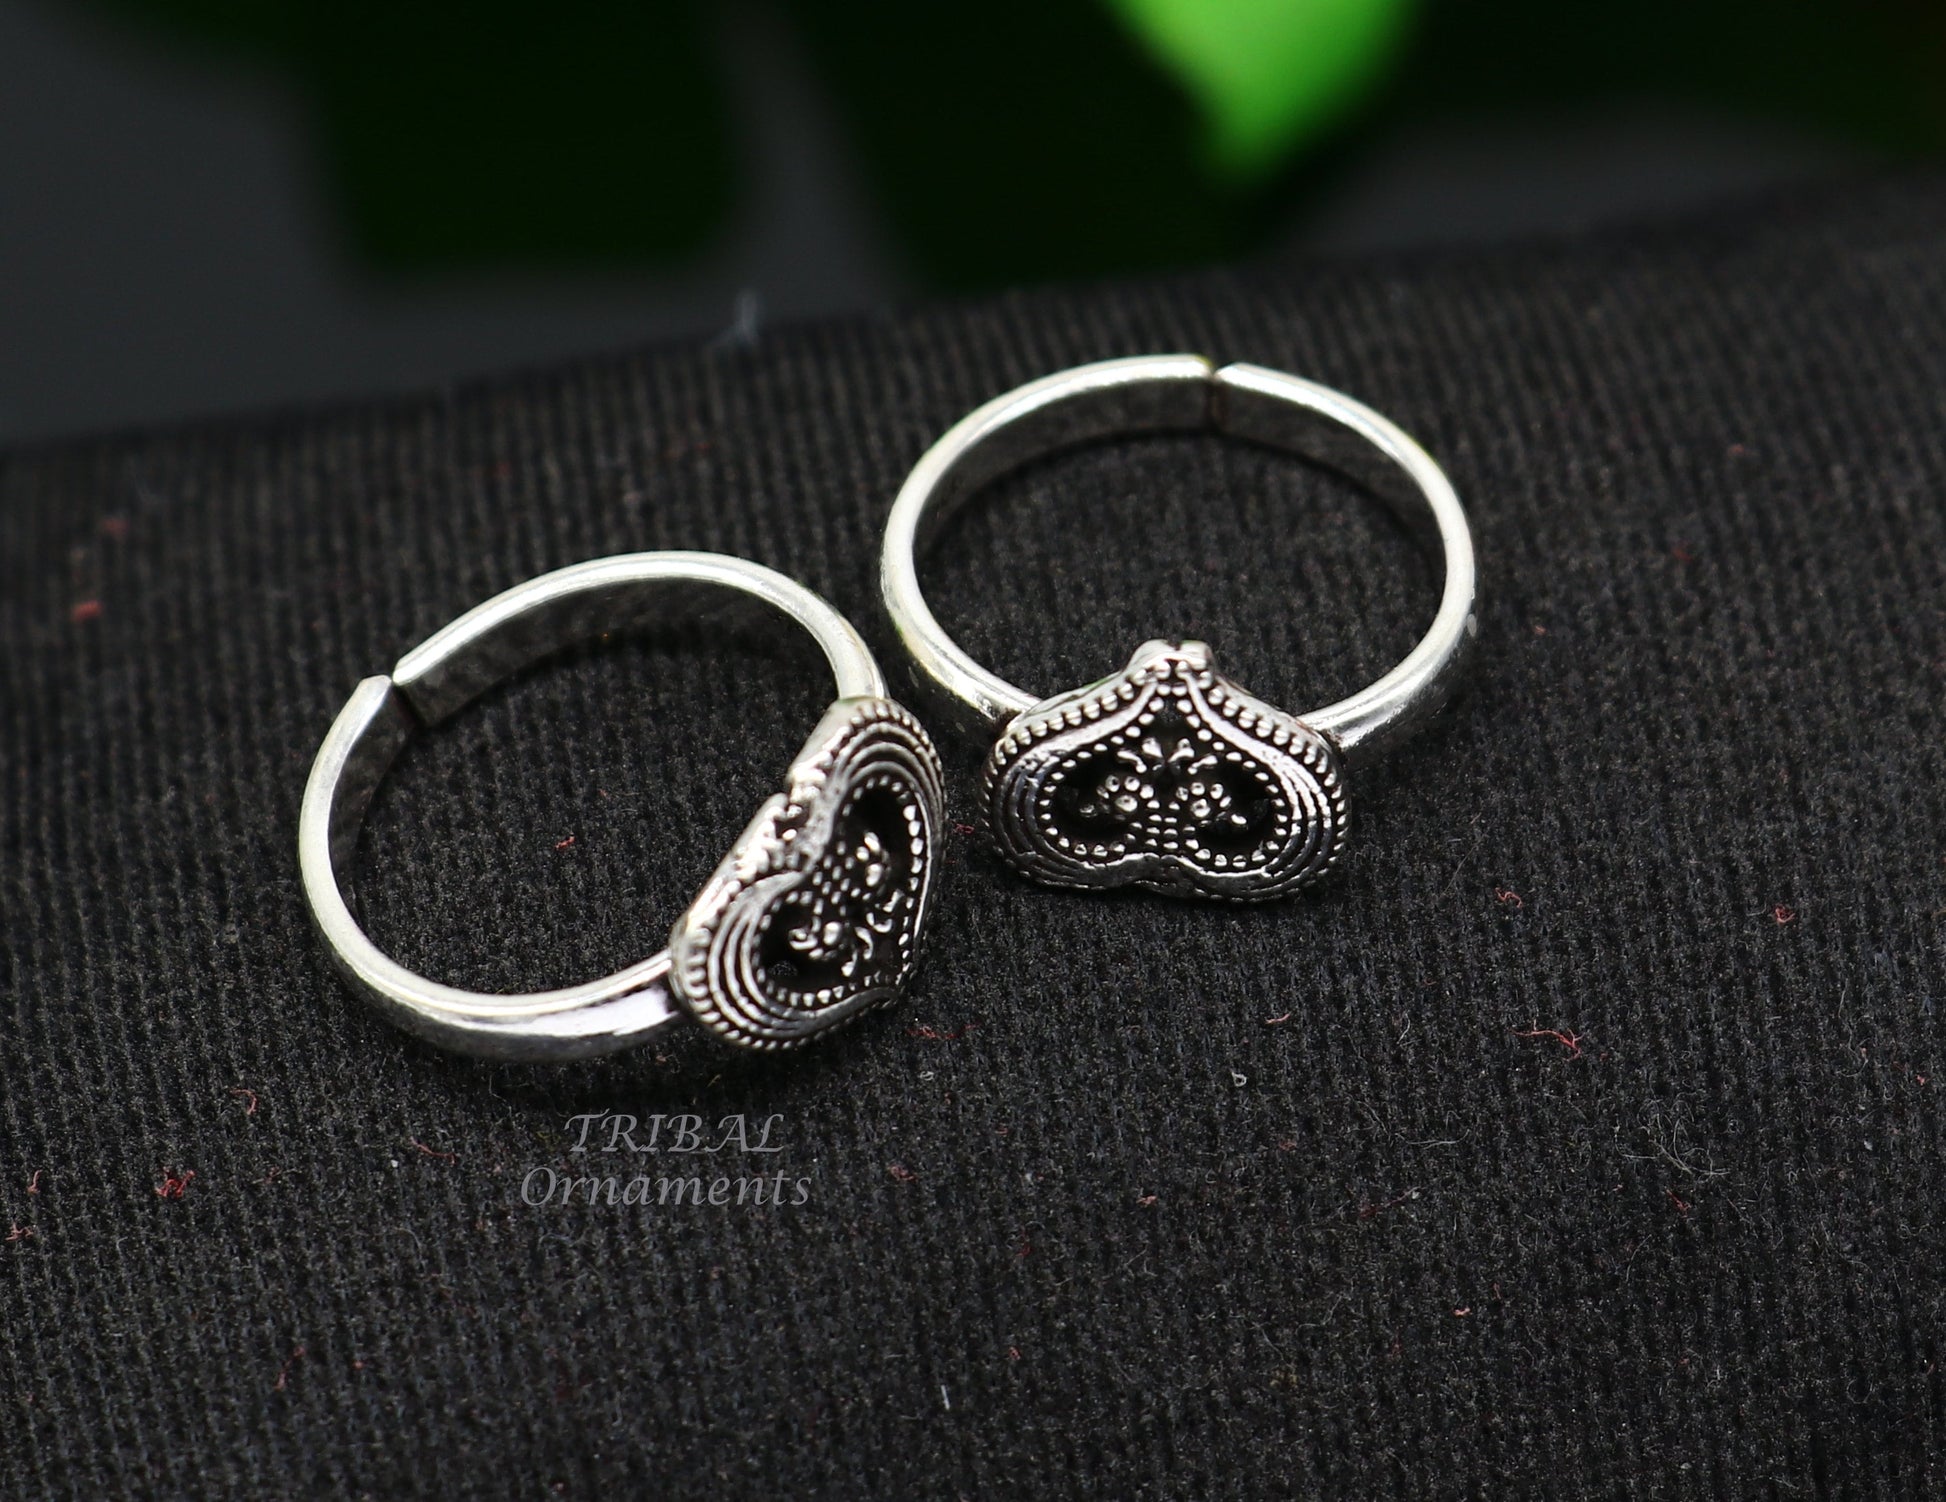 925 sterling silver gorgeous heart design handmade toe ring, toe band stylish women's brides jewelry, india traditional jewelry ytr51 - TRIBAL ORNAMENTS